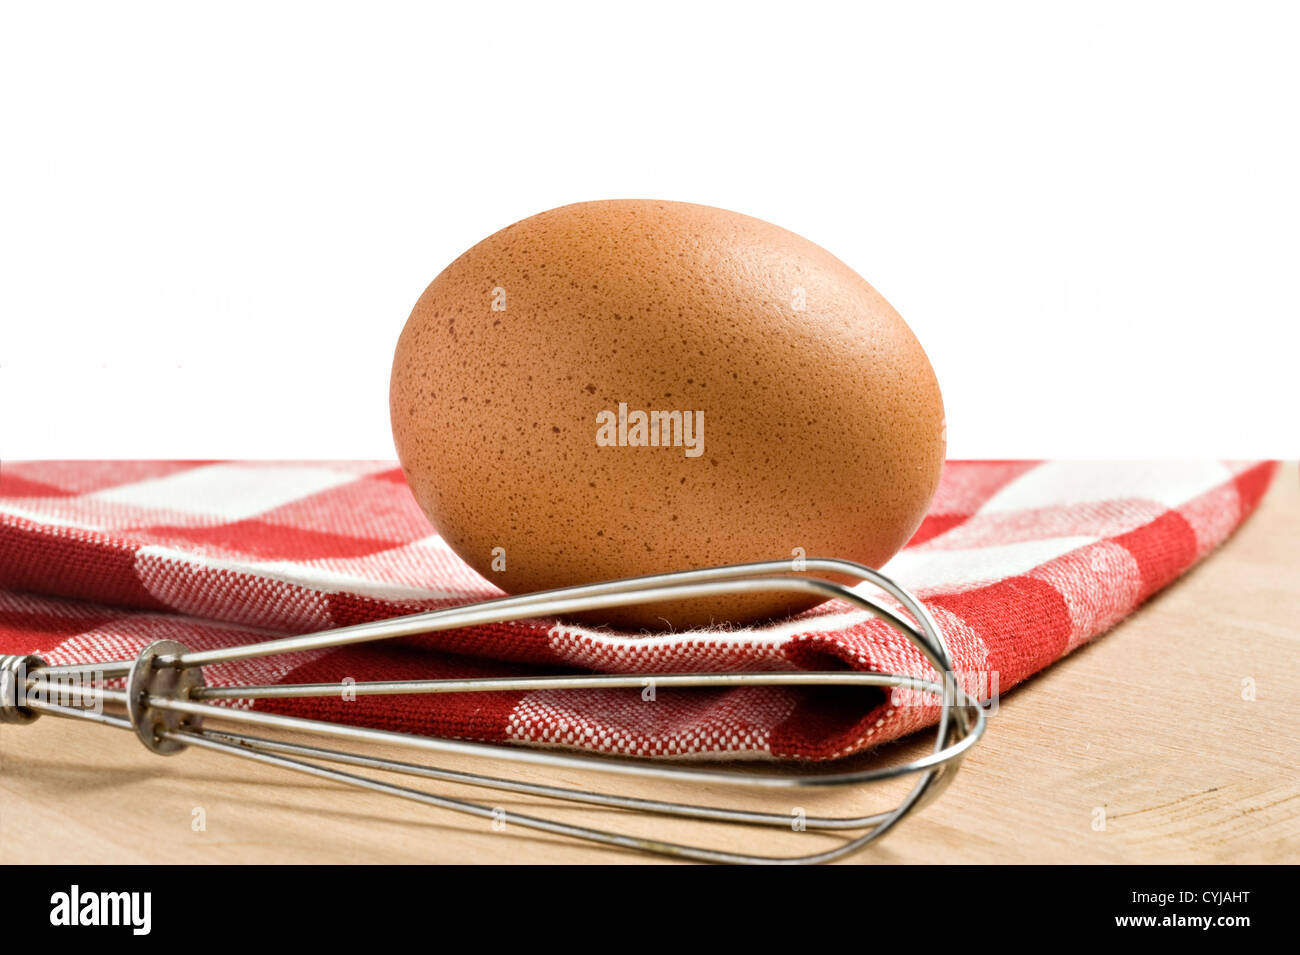 One egg against a white background with copy space Stock Photo